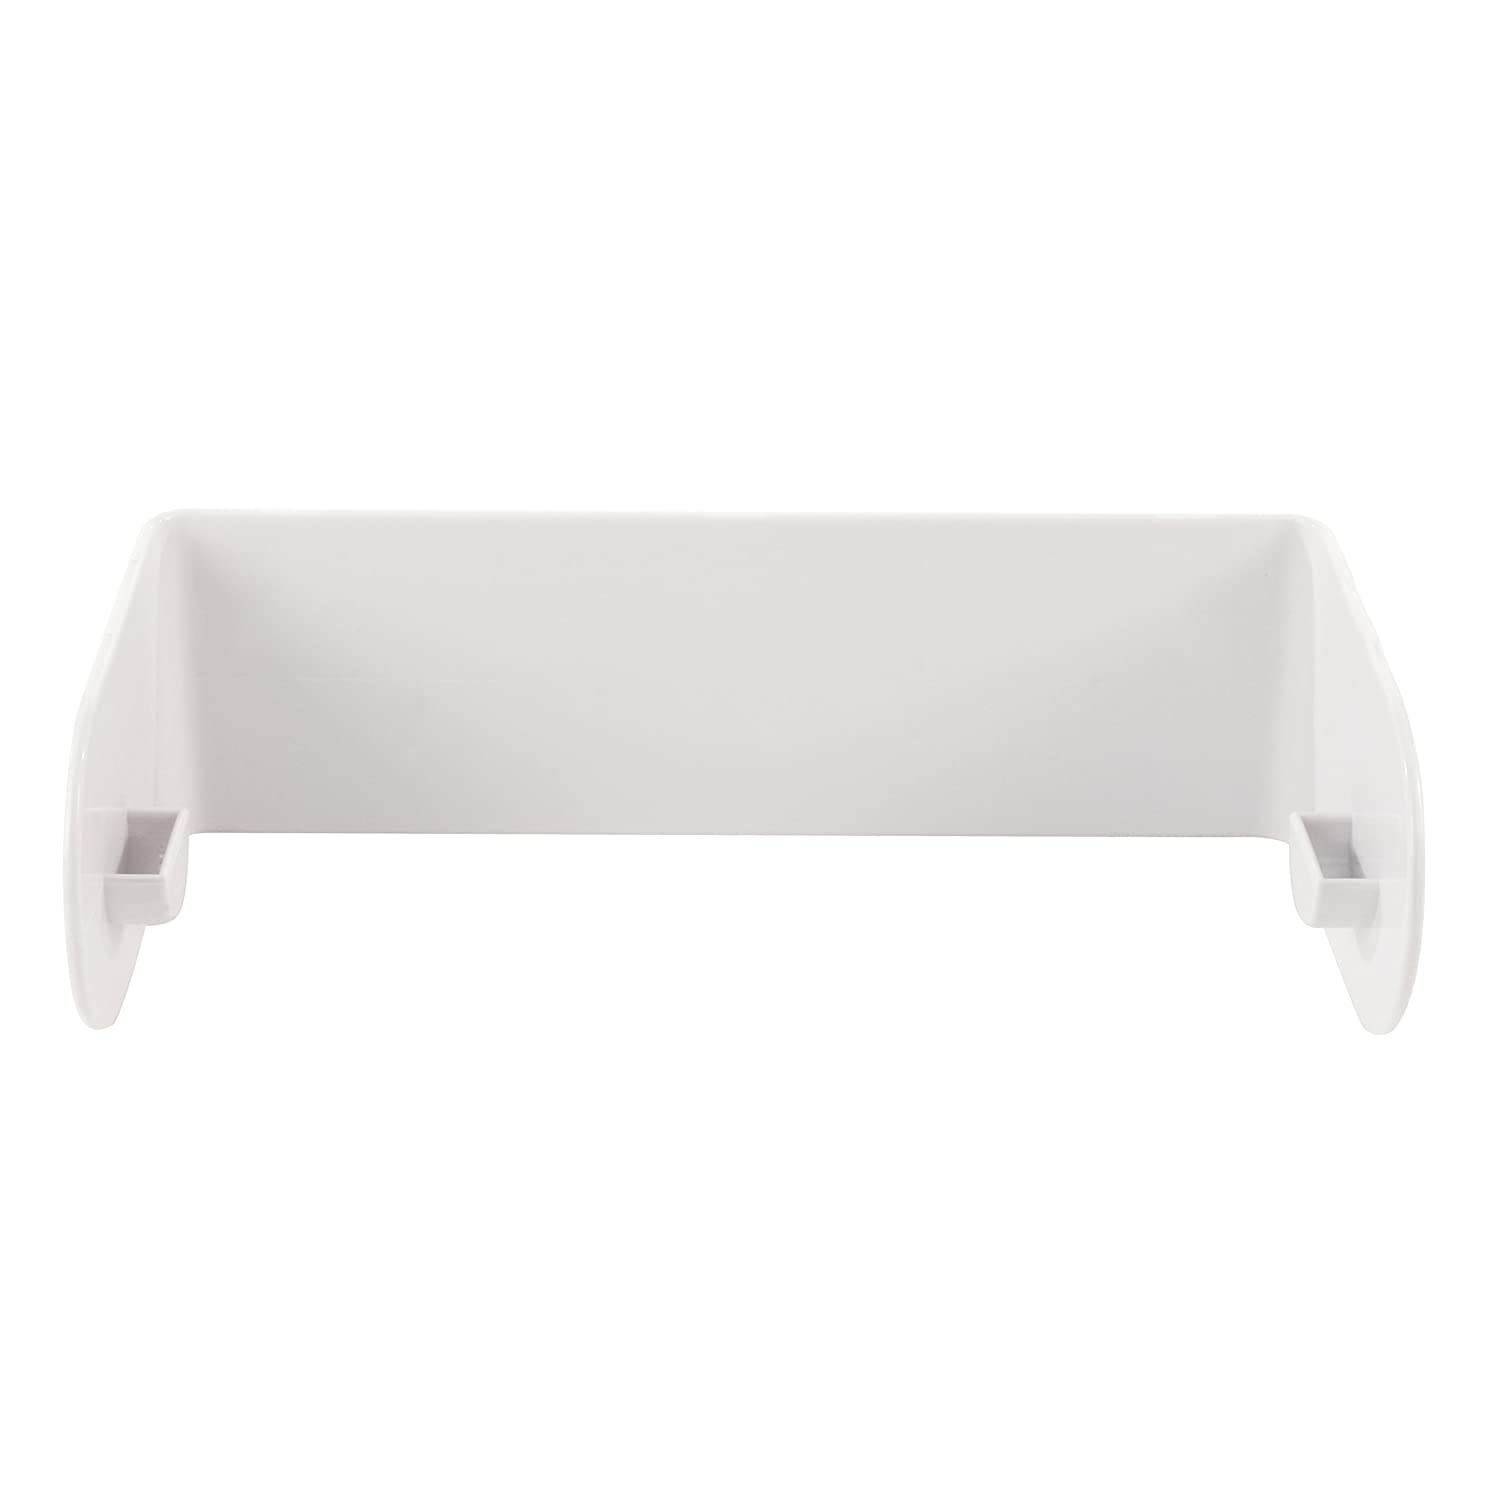 Strong Magnetic Paper Towel Holder Wall Mount White Plastic